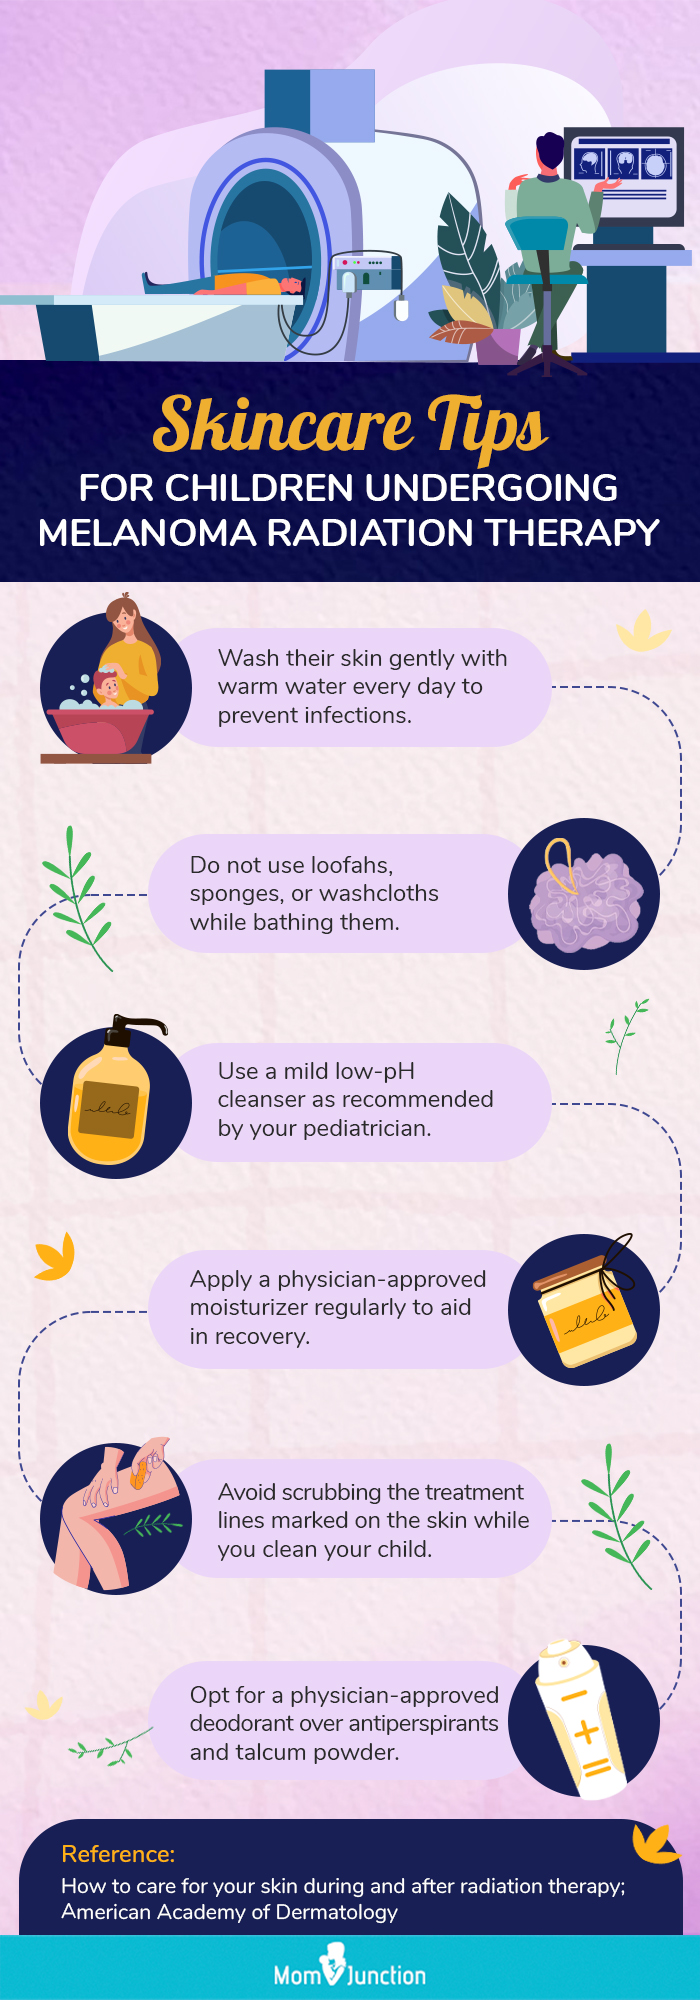 skincare tips for children undergoing melanoma radiation therapy [infographic]